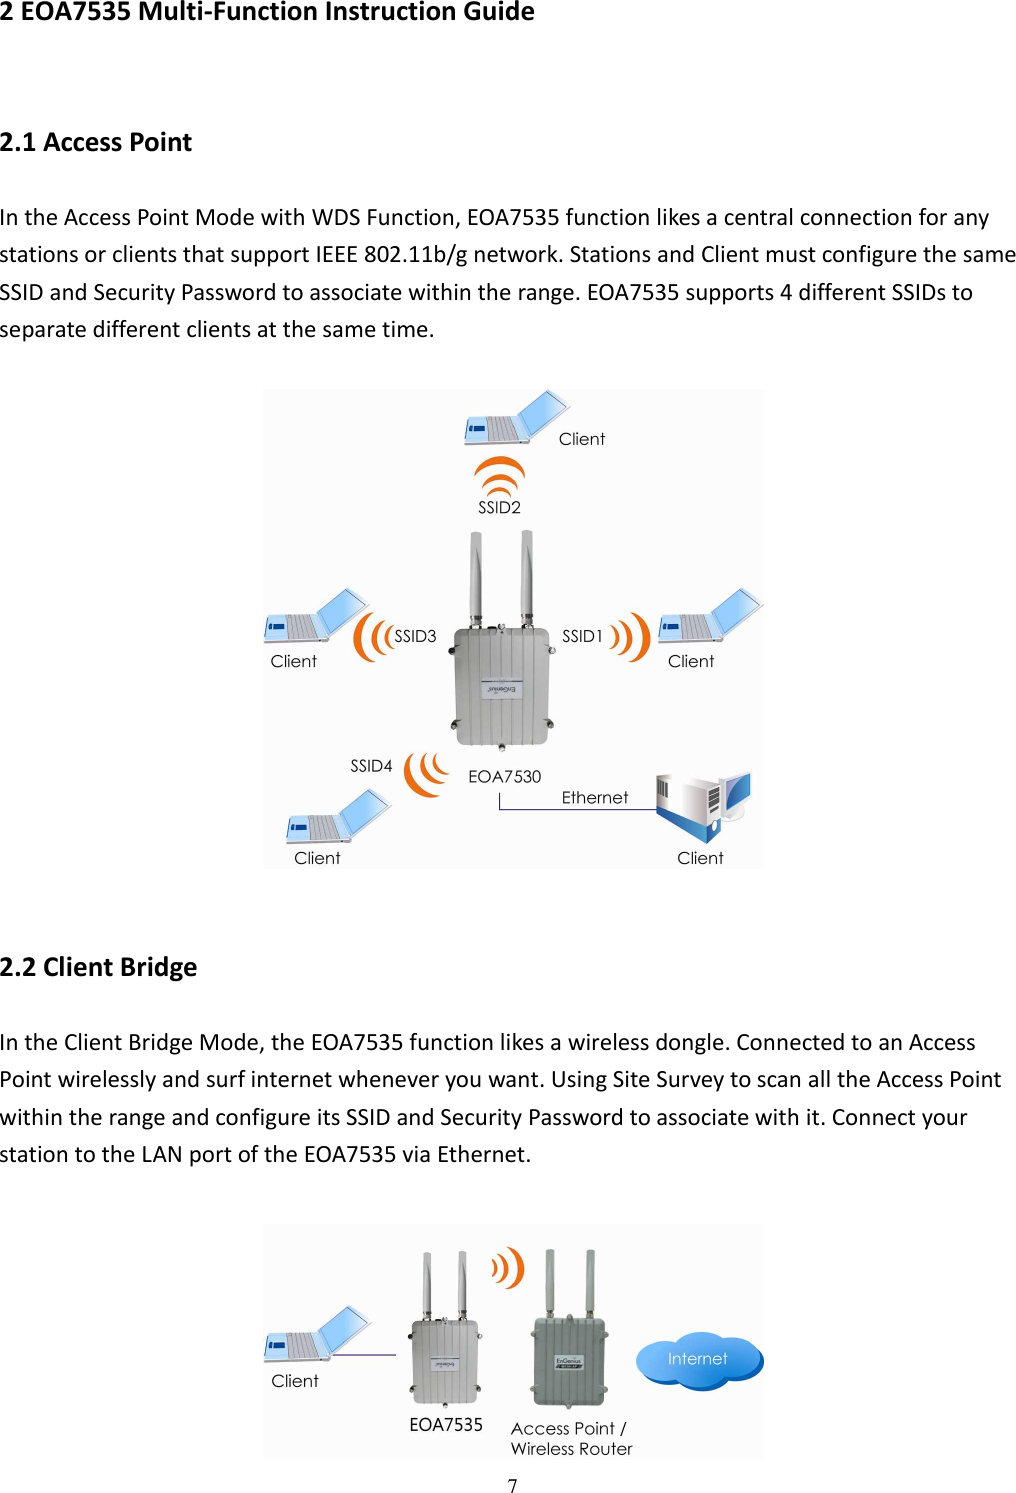 7 2 EOA7535 Multi-Function Instruction Guide 2.1 Access Point In the Access Point Mode with WDS Function, EOA7535 function likes a central connection for any stations or clients that support IEEE 802.11b/g network. Stations and Client must configure the same SSID and Security Password to associate within the range. EOA7535 supports 4 different SSIDs to separate different clients at the same time.    2.2 Client Bridge In the Client Bridge Mode, the EOA7535 function likes a wireless dongle. Connected to an Access Point wirelessly and surf internet whenever you want. Using Site Survey to scan all the Access Point within the range and configure its SSID and Security Password to associate with it. Connect your station to the LAN port of the EOA7535 via Ethernet.   